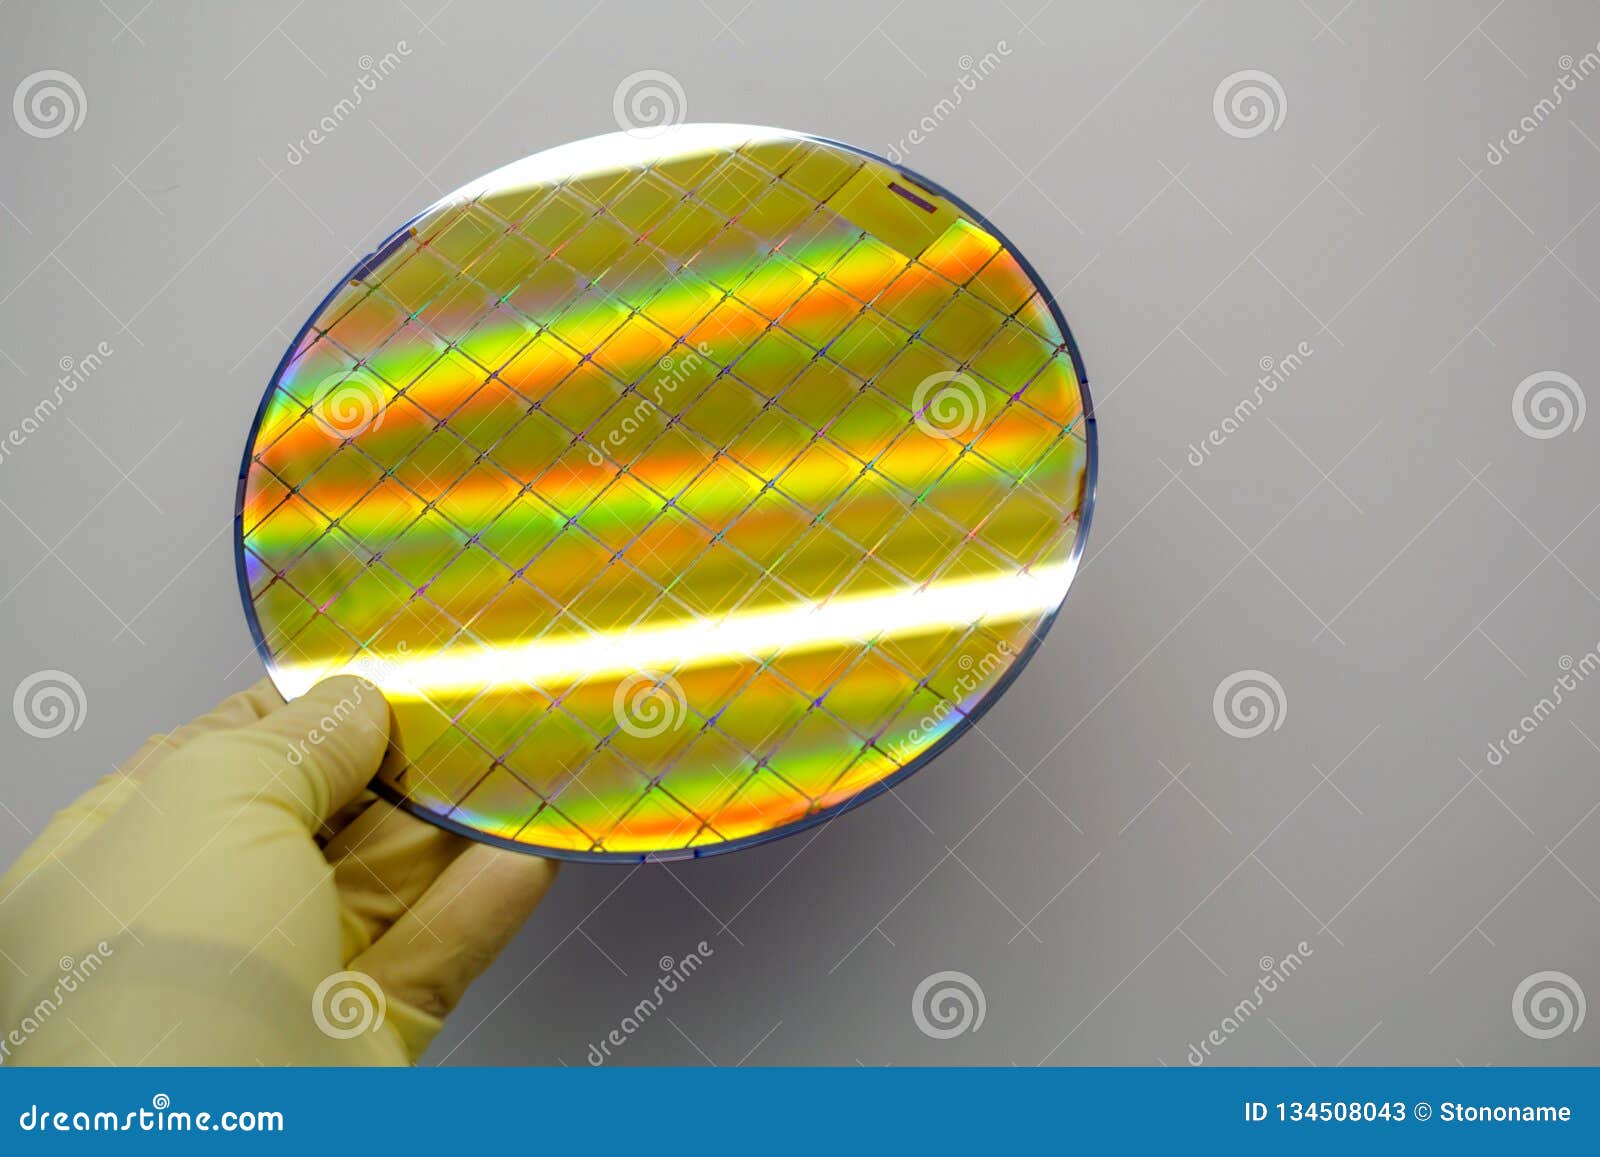 silicon wafer is held in the hands by gloves - a wafer is a thin slice of semiconductor material, such as a crystalline silicon,